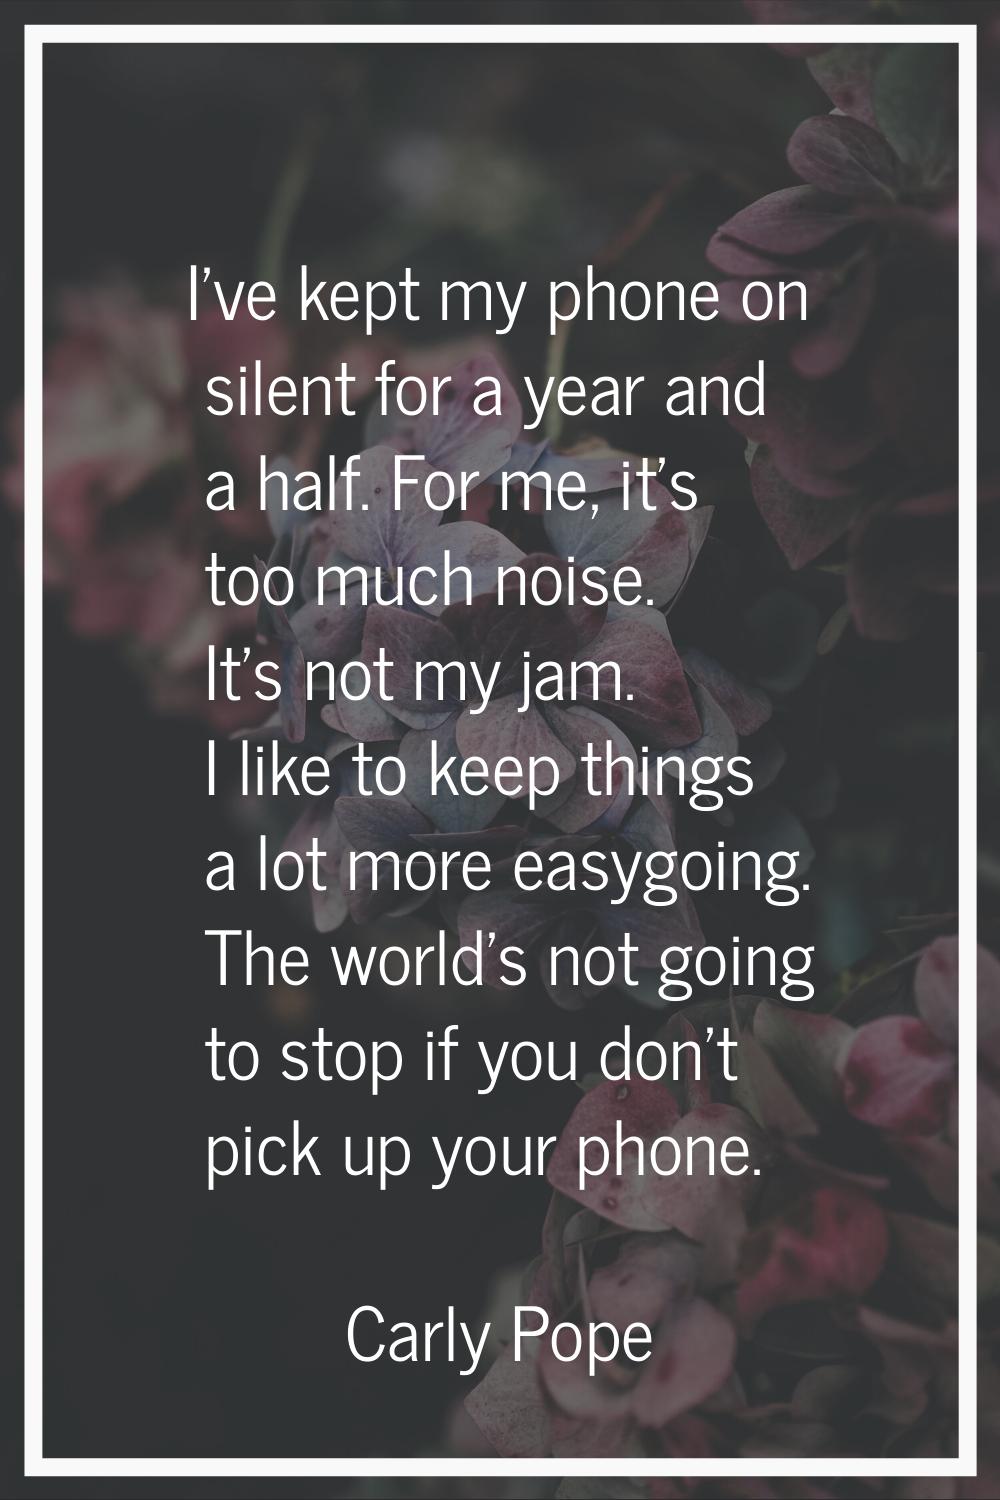 I've kept my phone on silent for a year and a half. For me, it's too much noise. It's not my jam. I